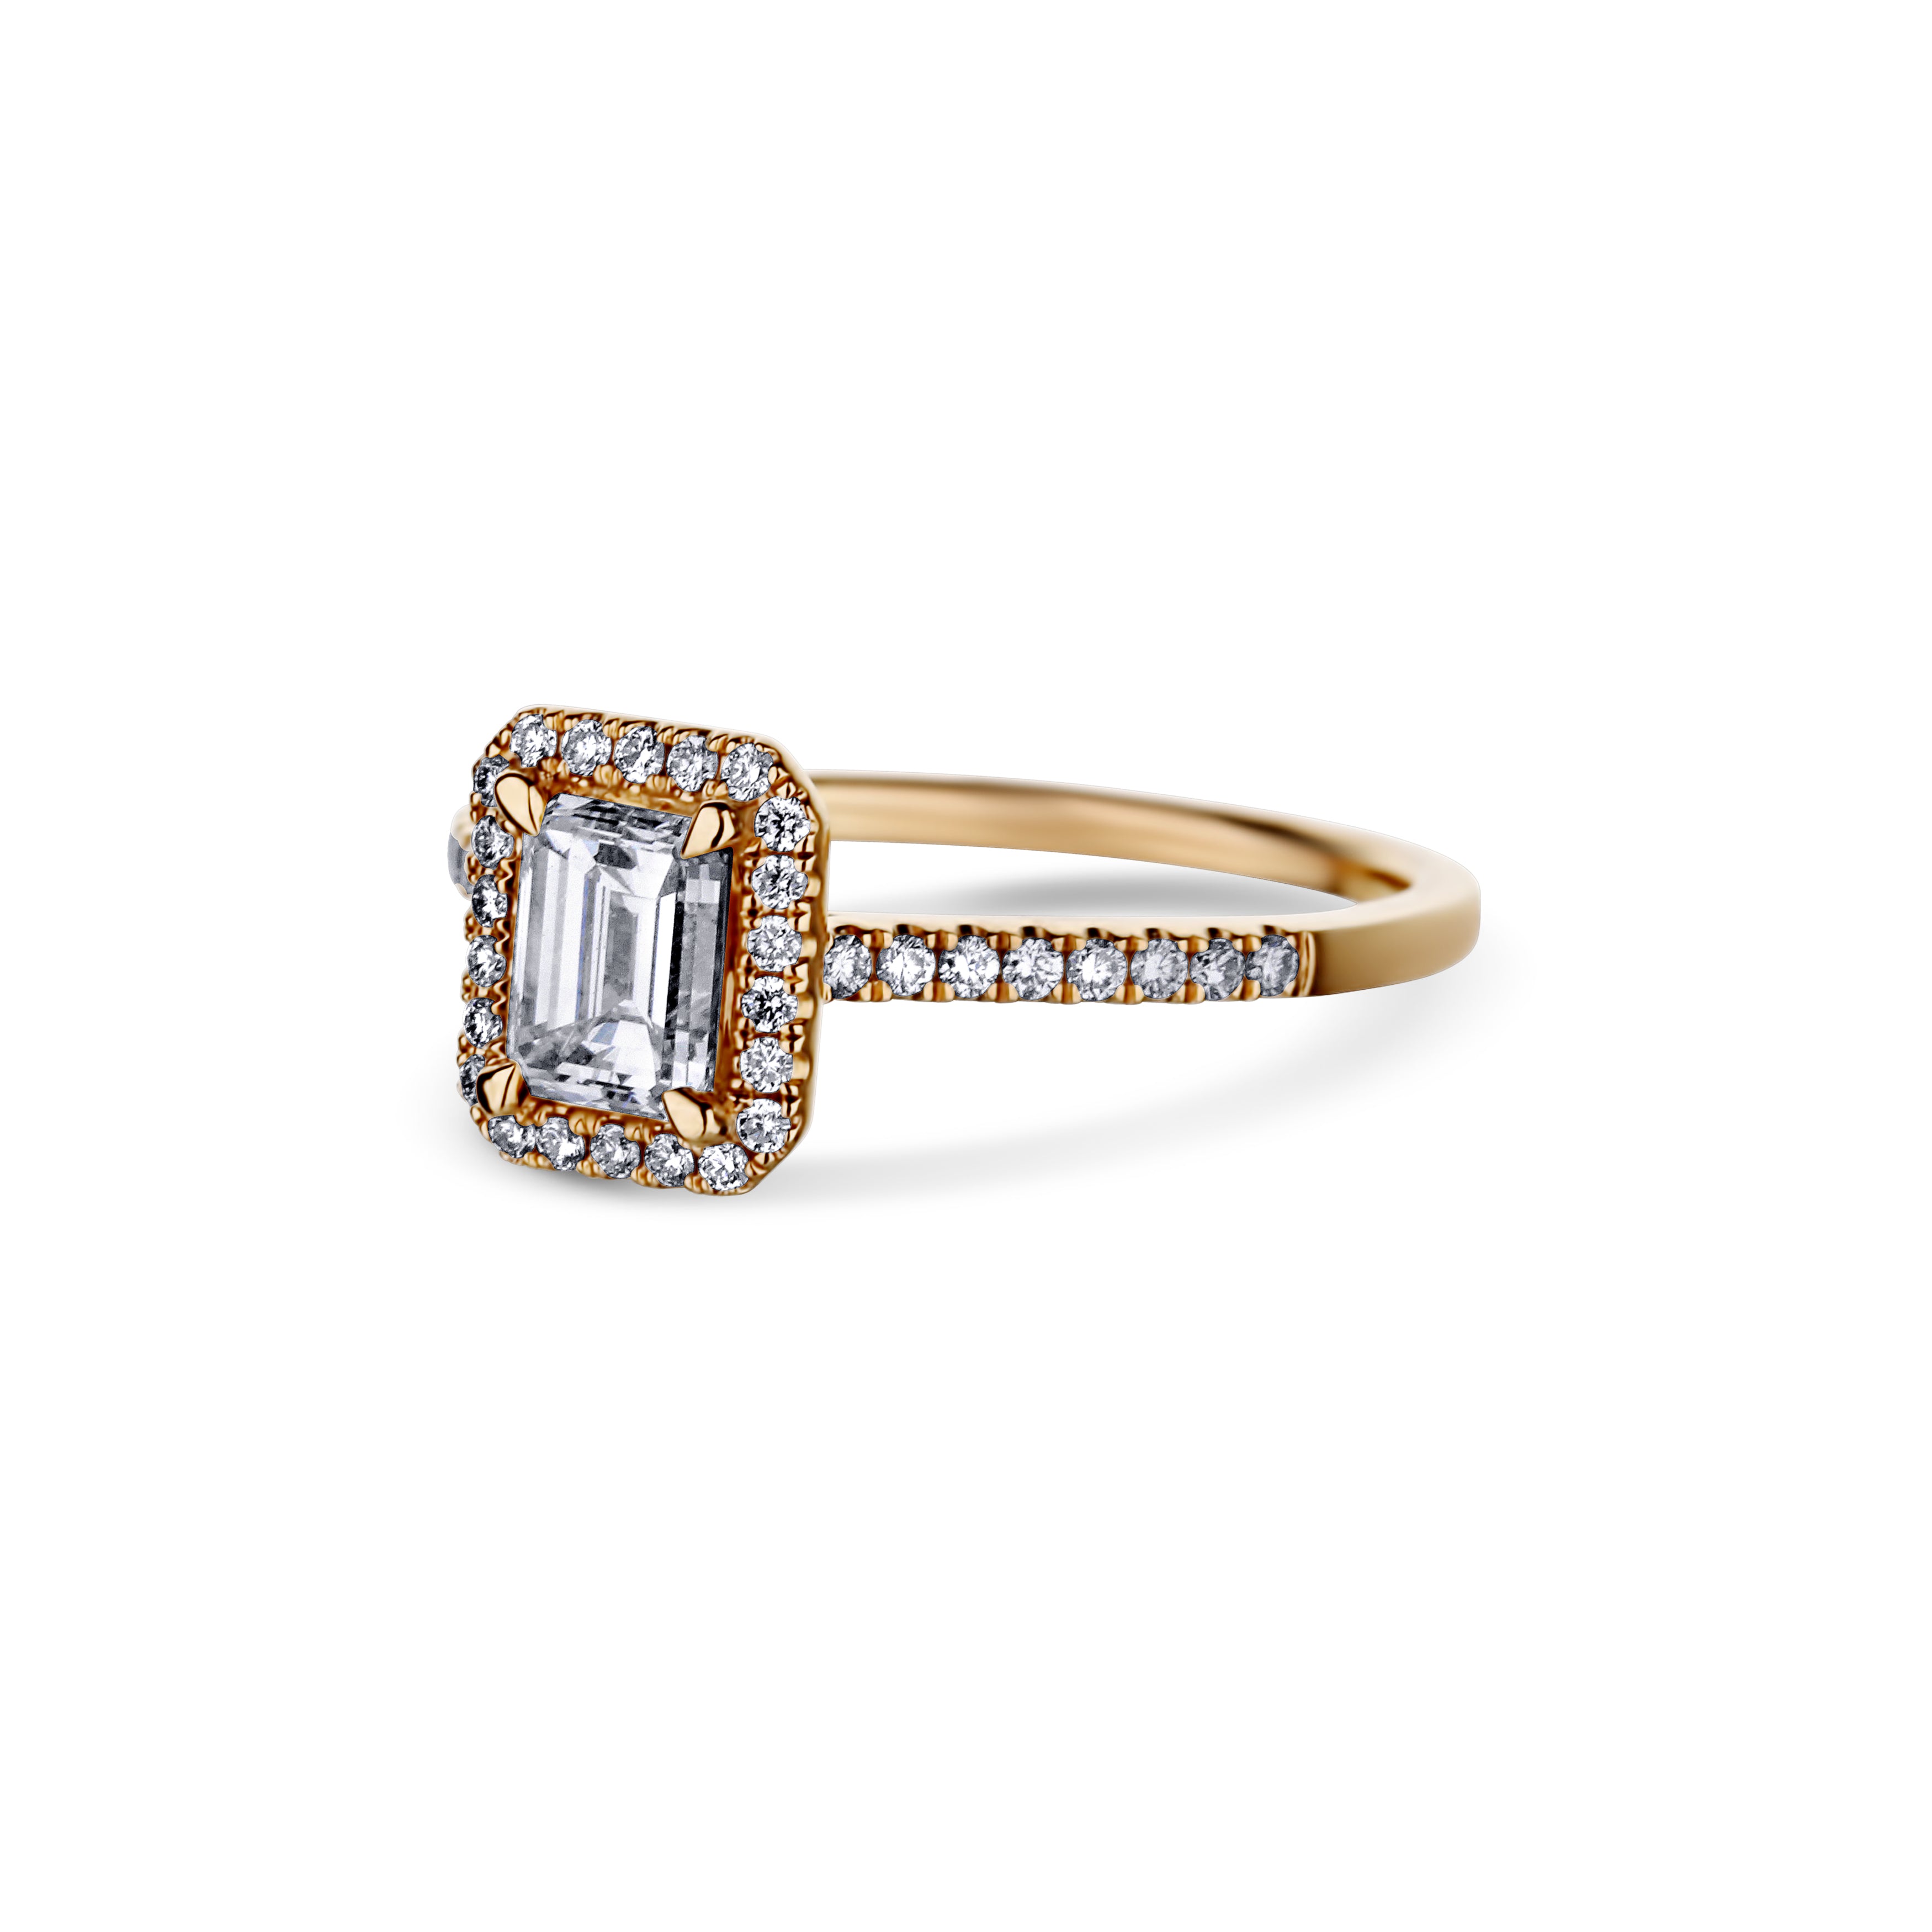 18K Rose Gold With A 0.77 Carat Emerald Cut Diamond Ring With Halo